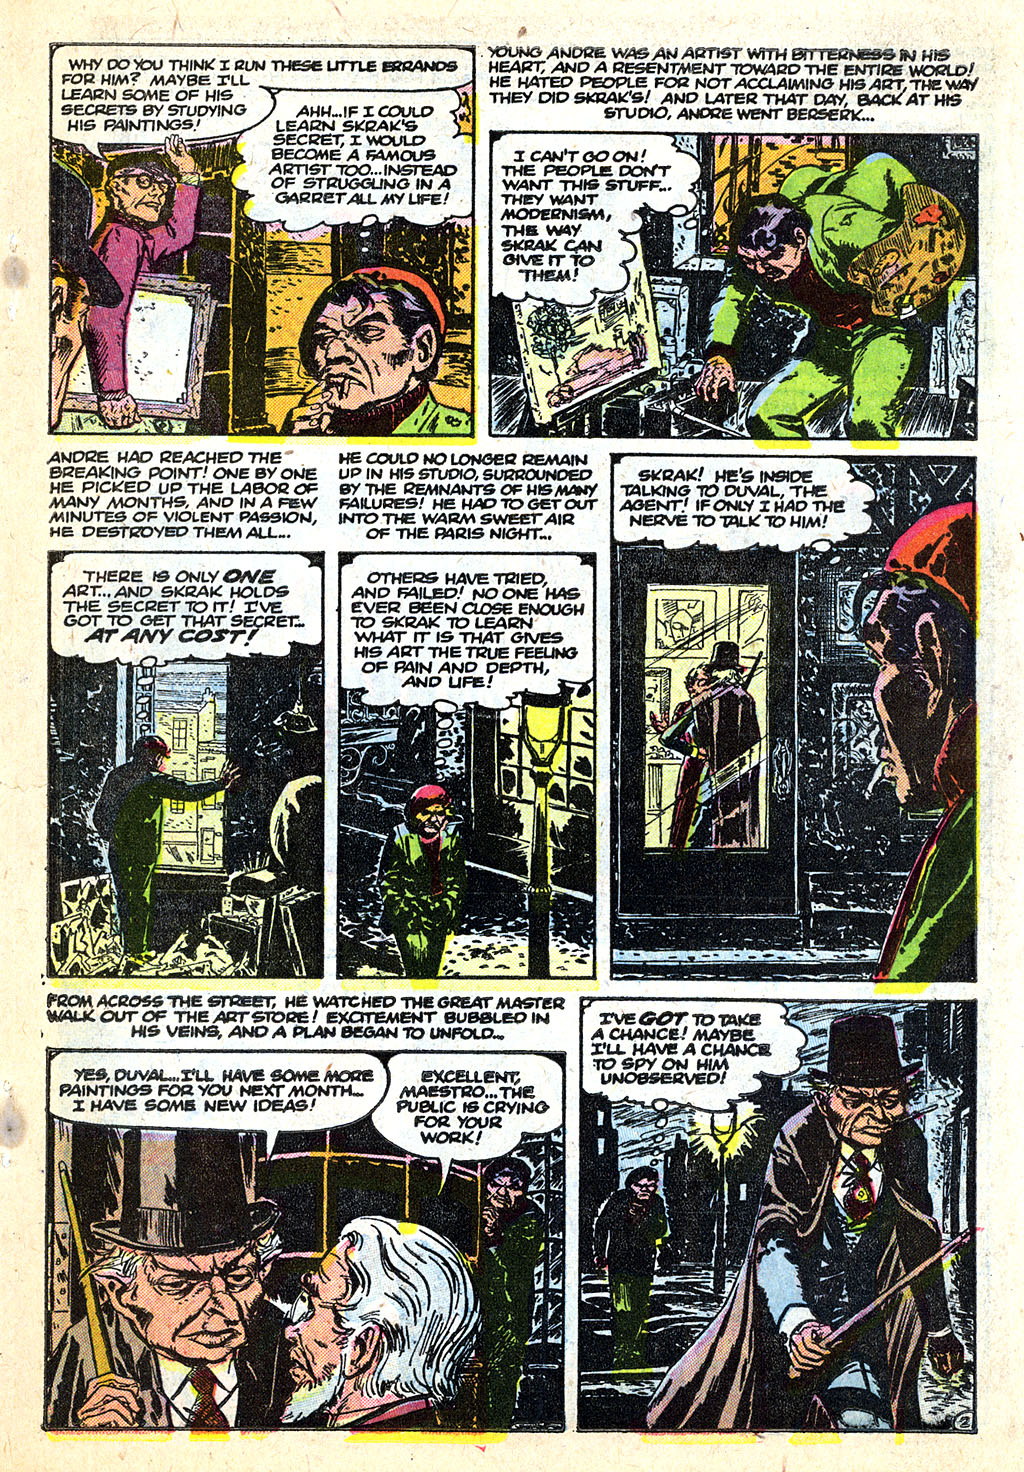 Marvel Tales (1949) 127 Page 22